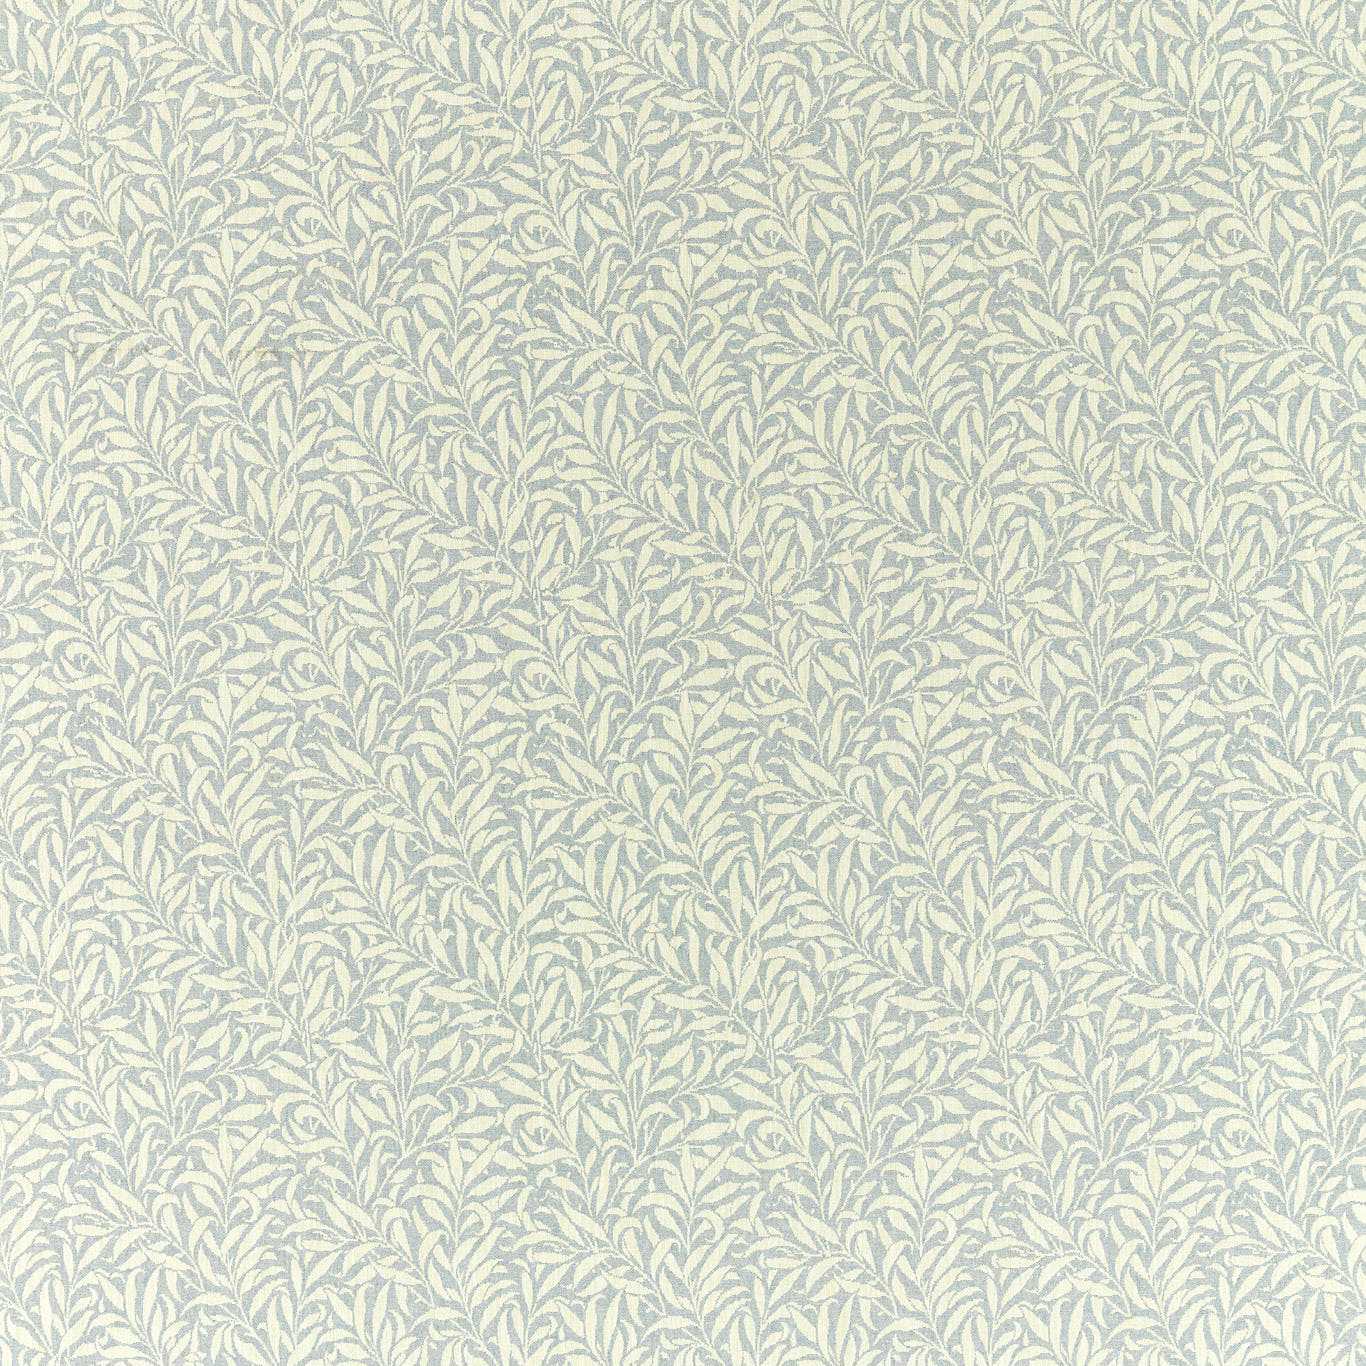 Pure Willow Boughs Weave Seagreen Fabric by MOR